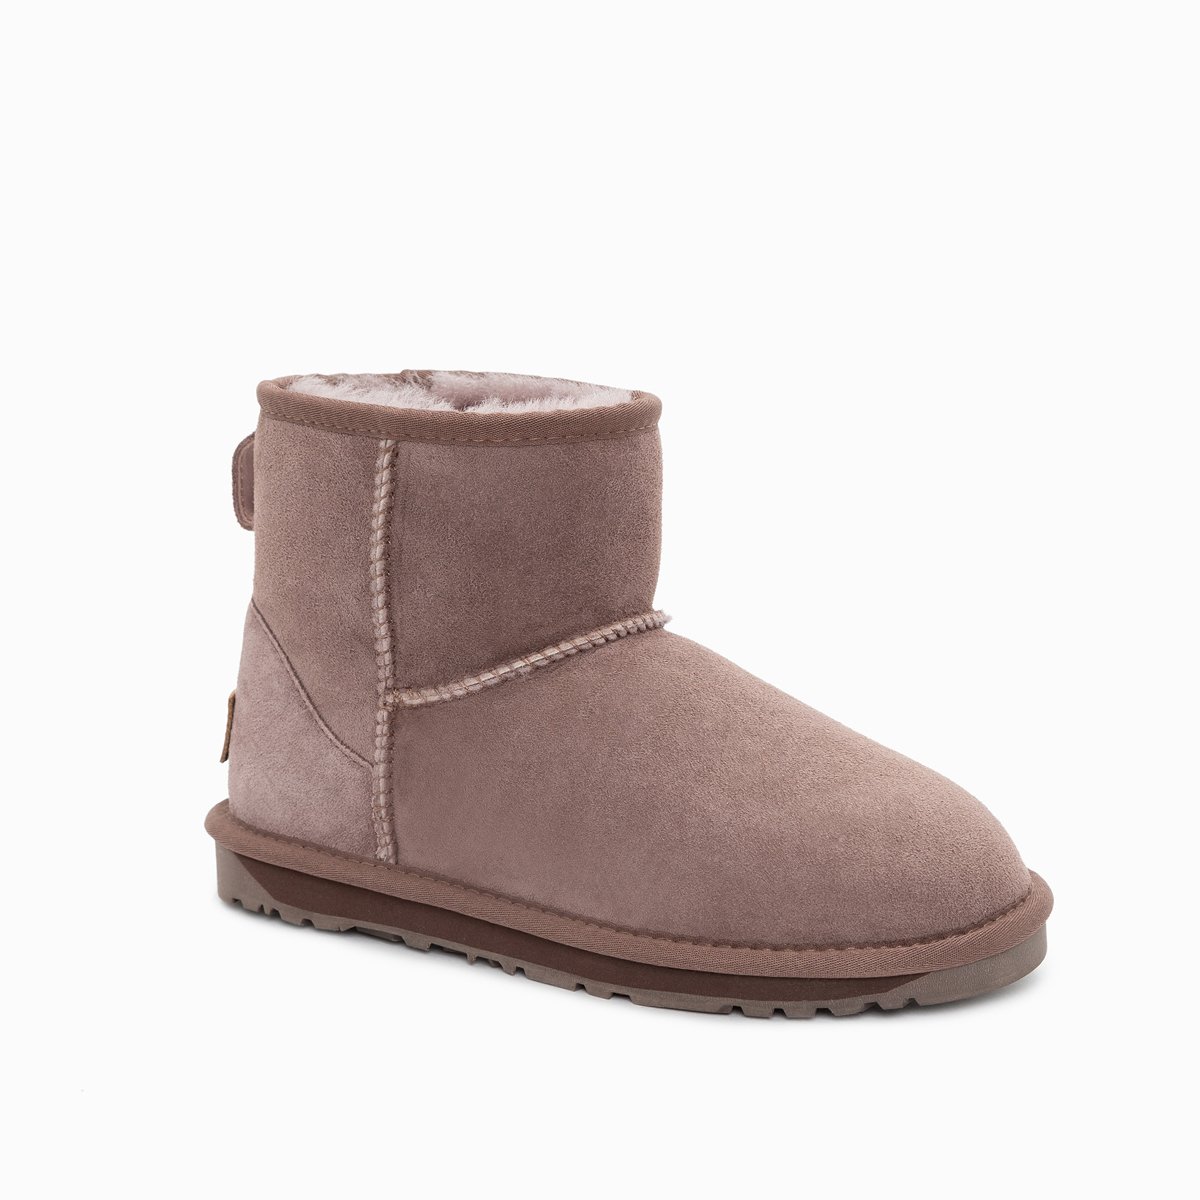 authentic ugg boots adelaide